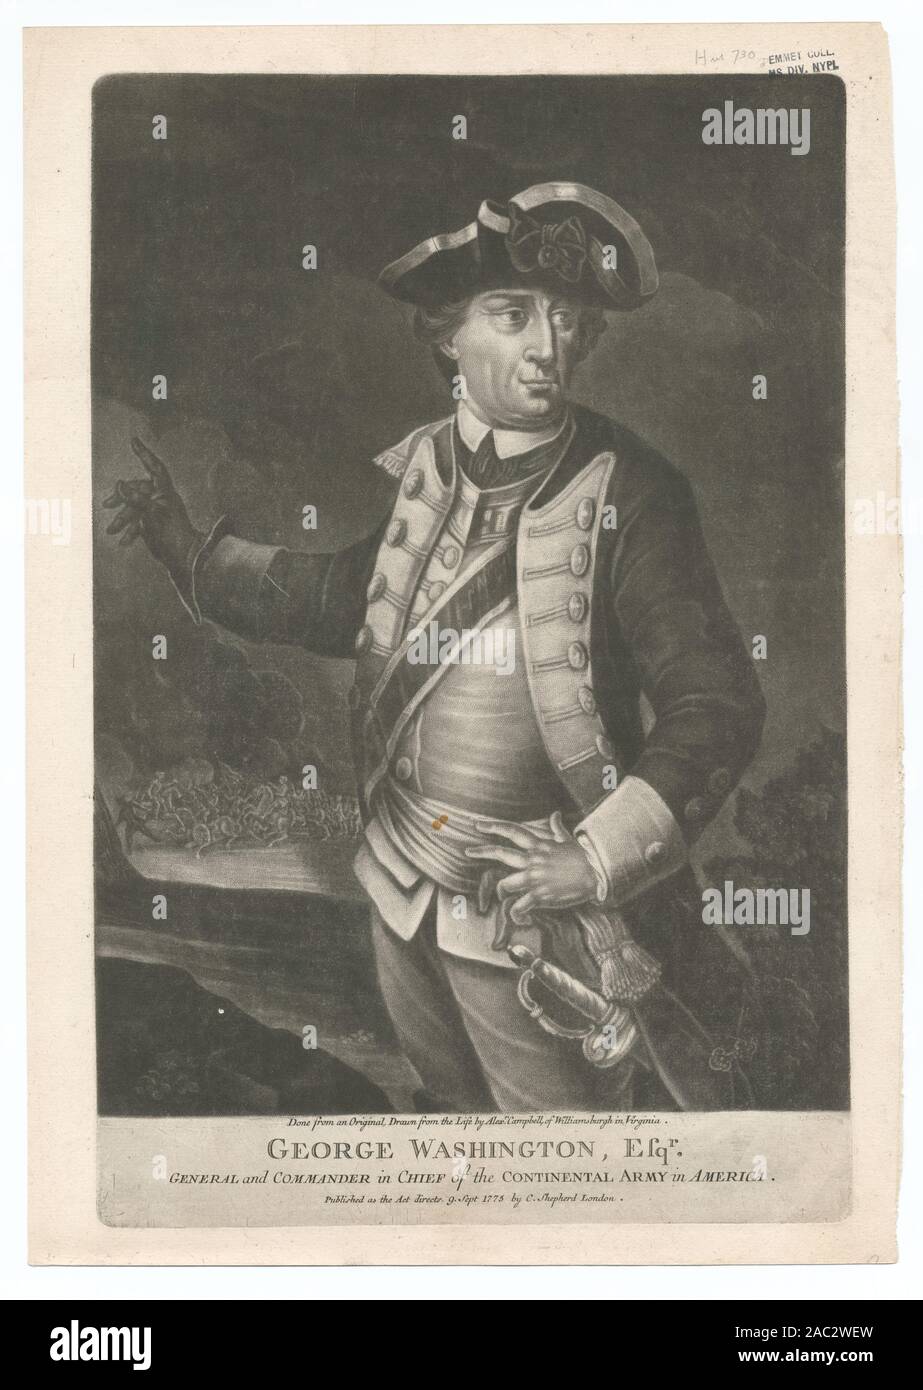 George Washington Esqr General and Commander in Chief of the Continental Army in America Printmakers include Henry Bryan Hall and James Smillie. Title from Calendar of the Emmet Collection. EM8343; George Washington Esqr. General and Commander in Chief of the Continental Army in America Stock Photo